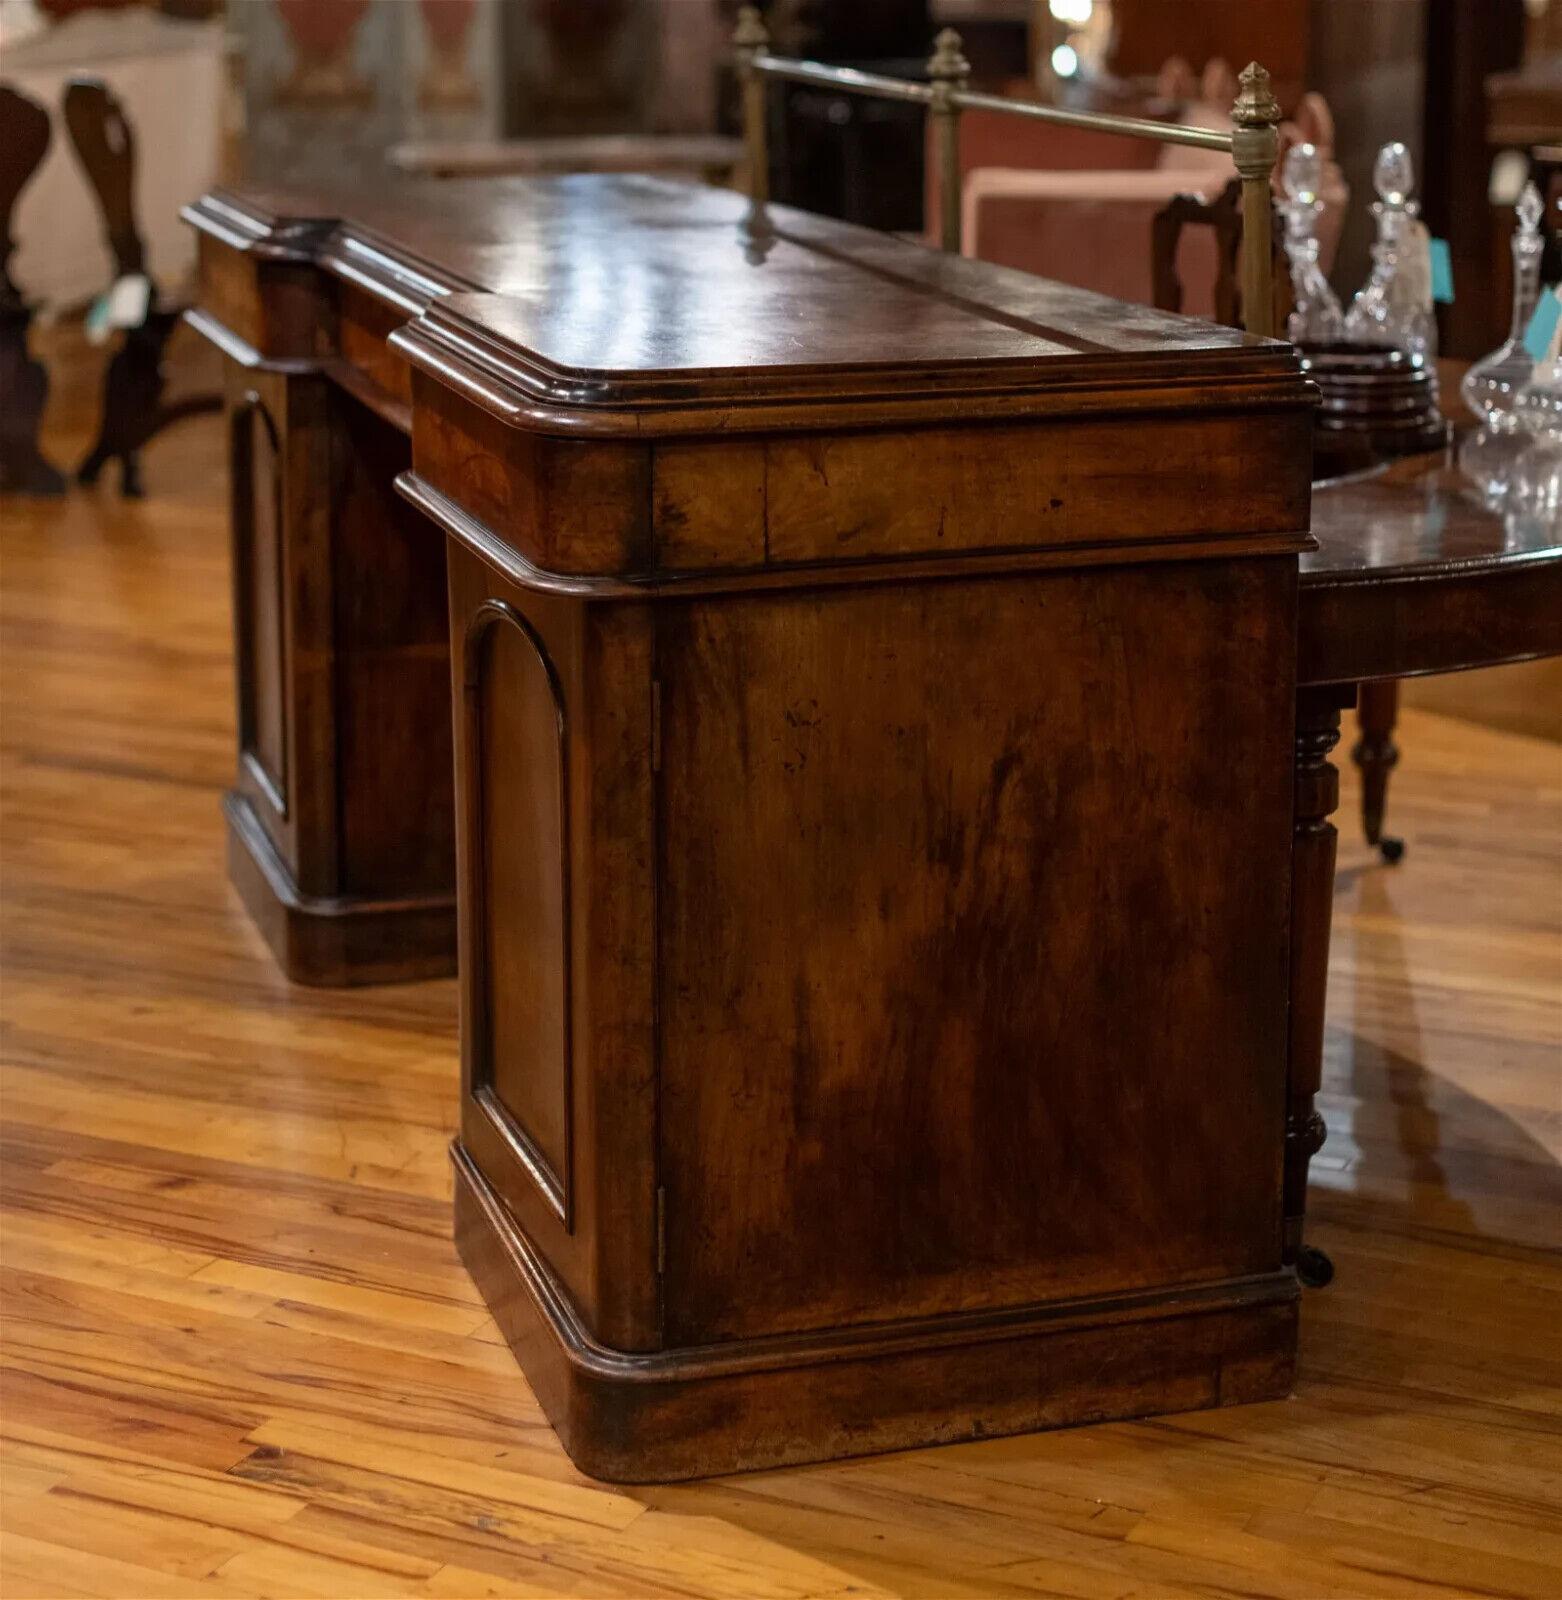 Stunning Antique Sideboard, English, Mahogany, Pedestal Sideboard, 6 Drawers, 19th C, 1800s!!

This antique English sideboard is a true masterpiece. Crafted from fine mahogany and carved with exquisite detail, this 19th century piece is a stunning